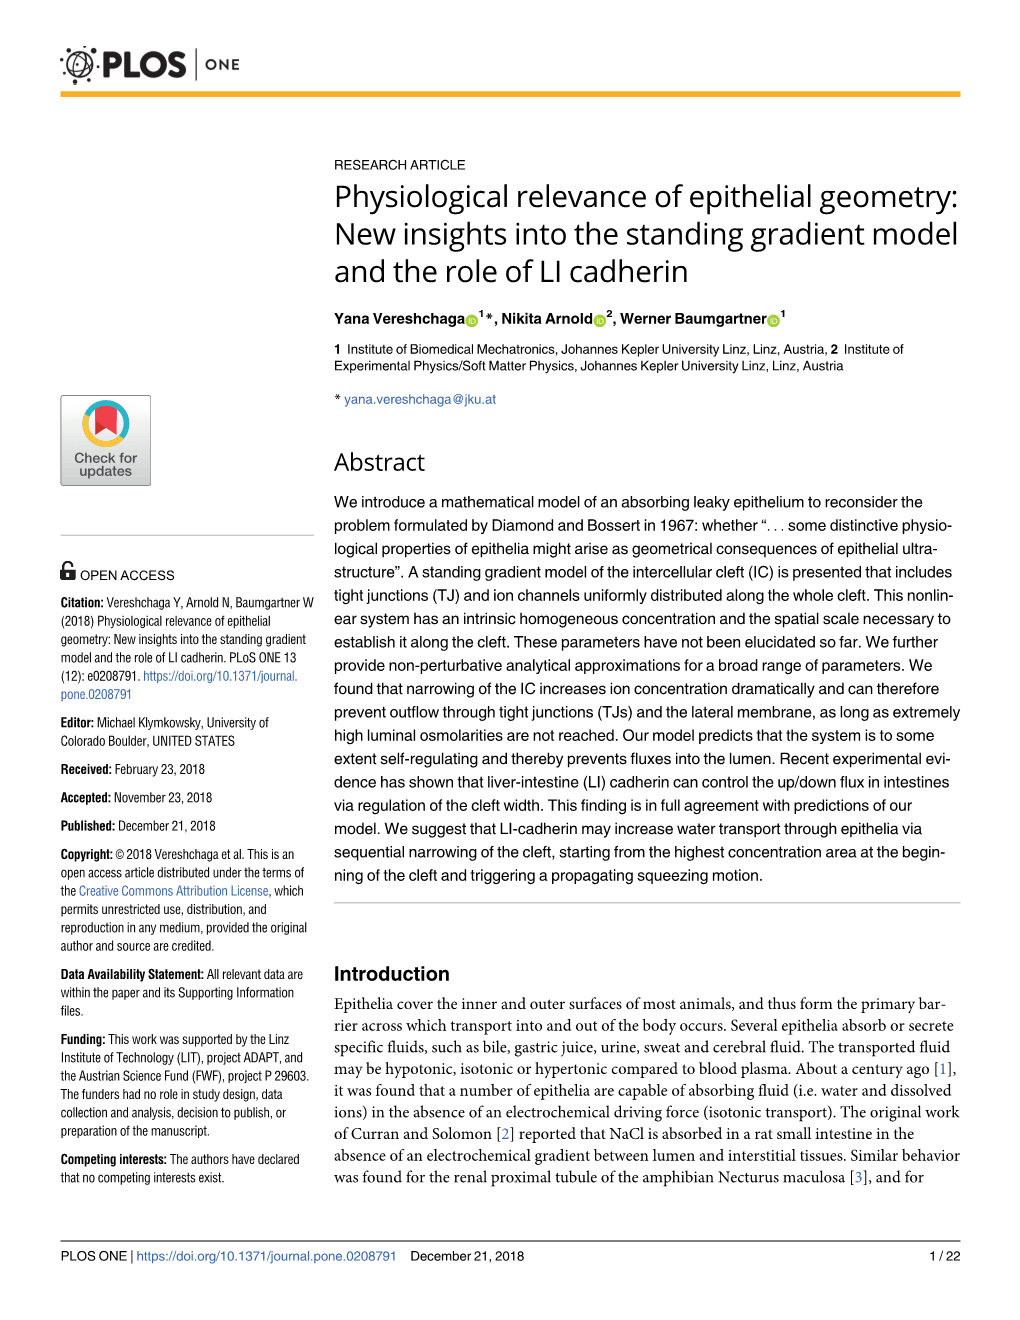 Physiological Relevance of Epithelial Geometry: New Insights Into the Standing Gradient Model and the Role of LI Cadherin